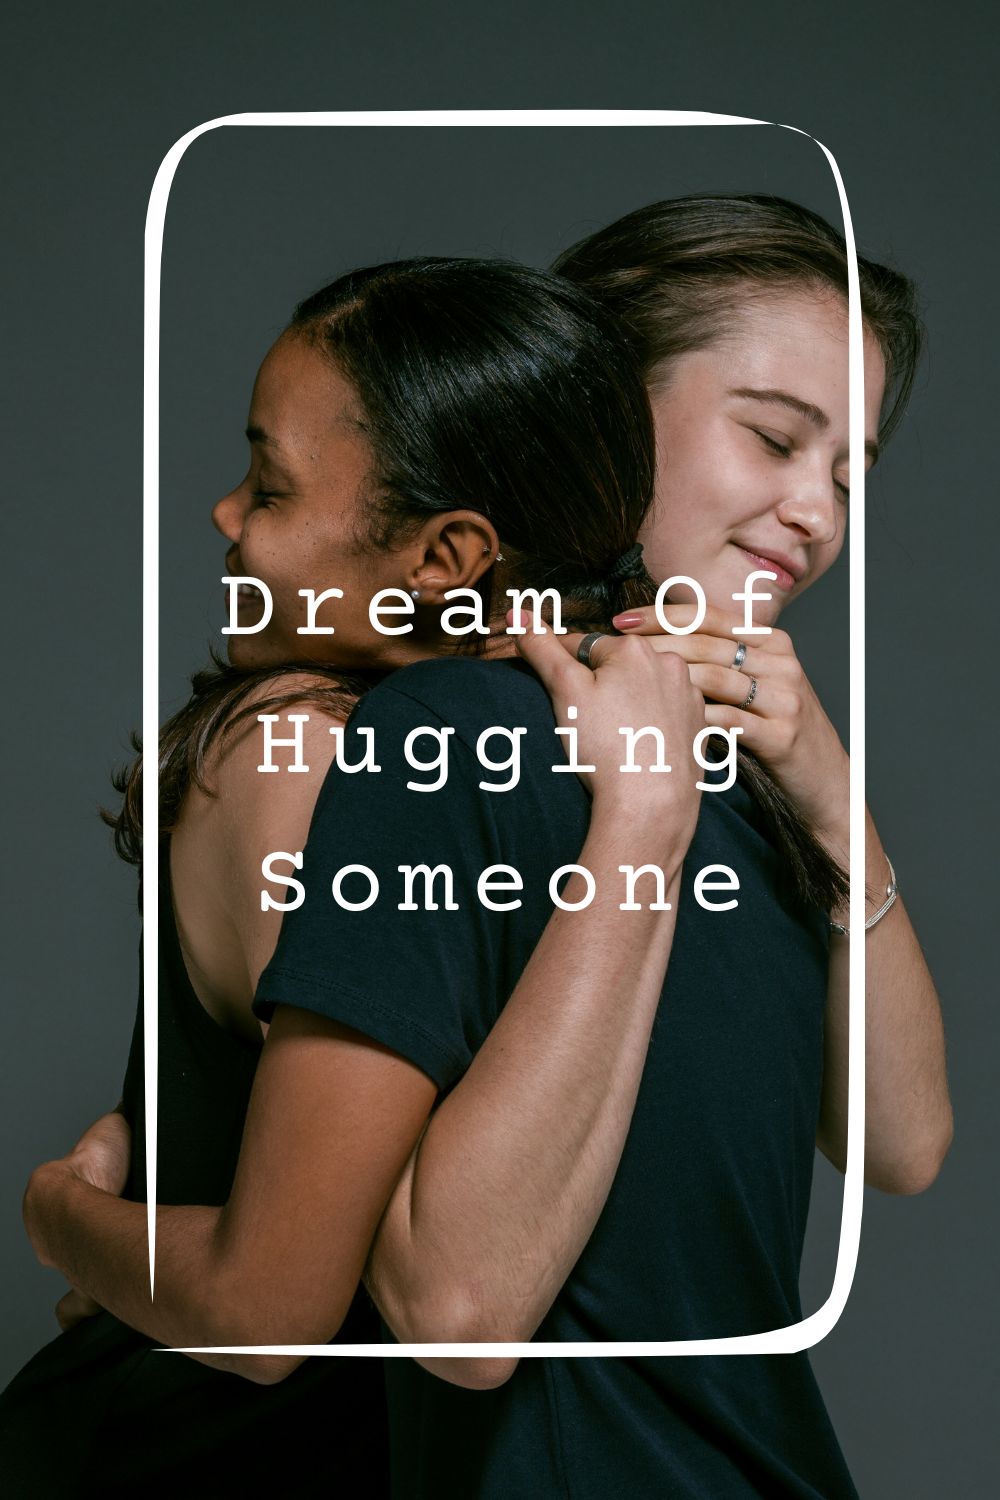 Dream Of Hugging Someone Meanings 2